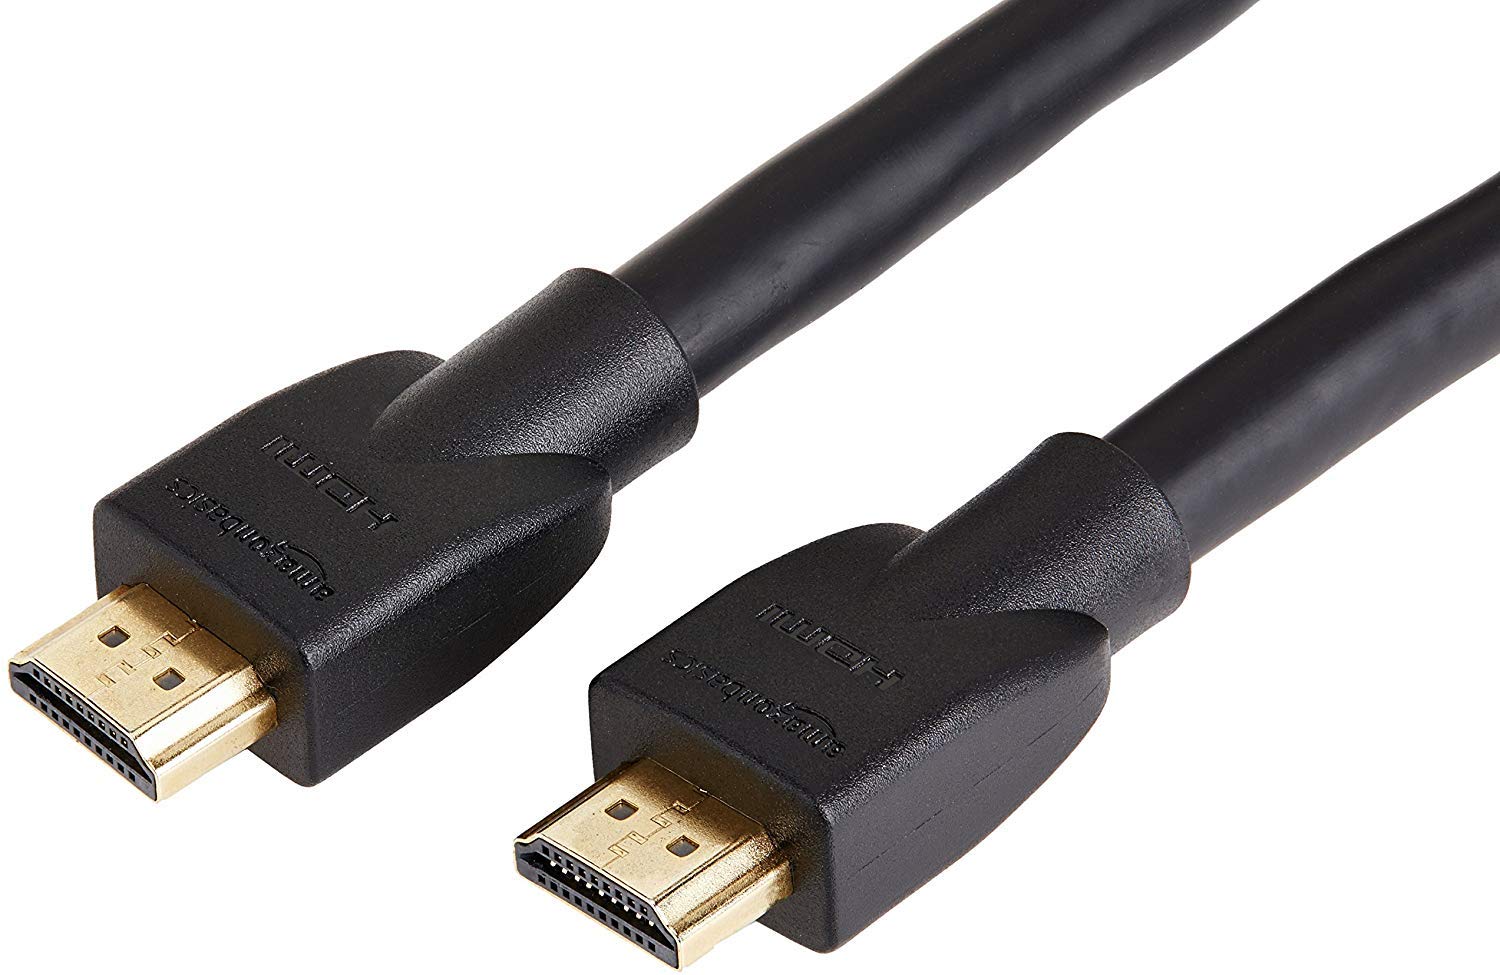 AmazonBasics 15 Feet High-Speed HDMI Cable Supports 4k Videos